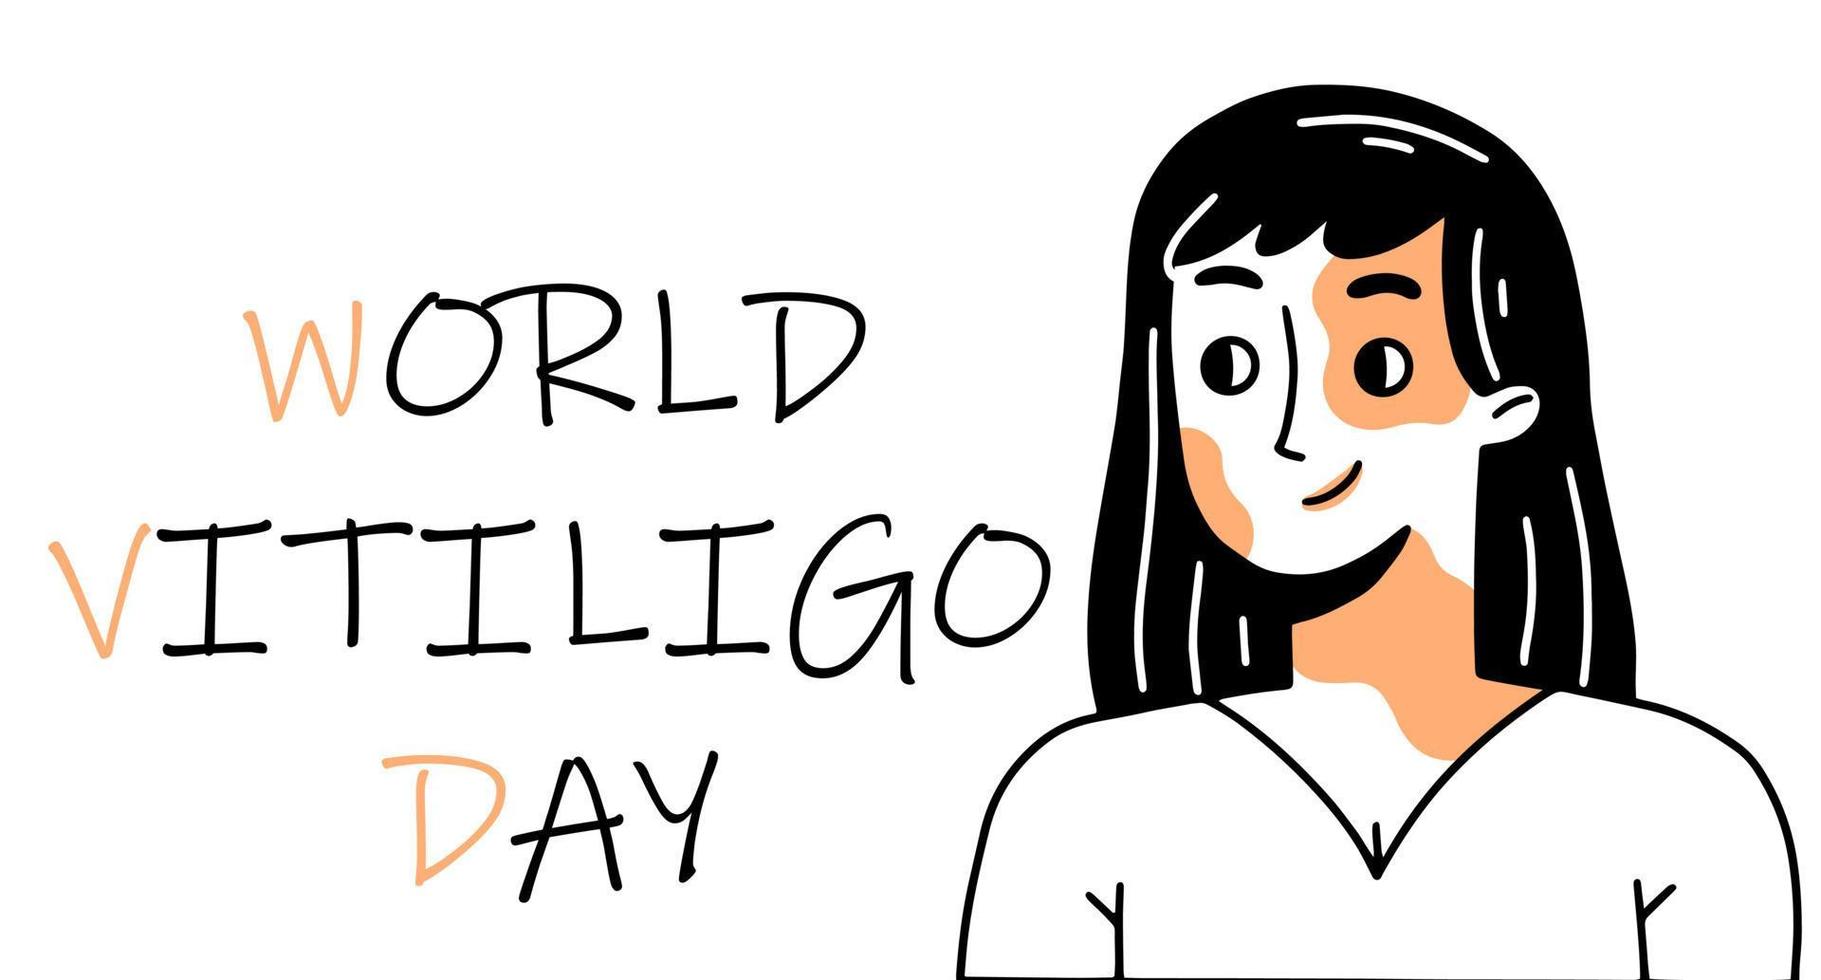 World vitiligo day banner or poster with happy smiling young woman. Character with vitiligo. Vector illustration.